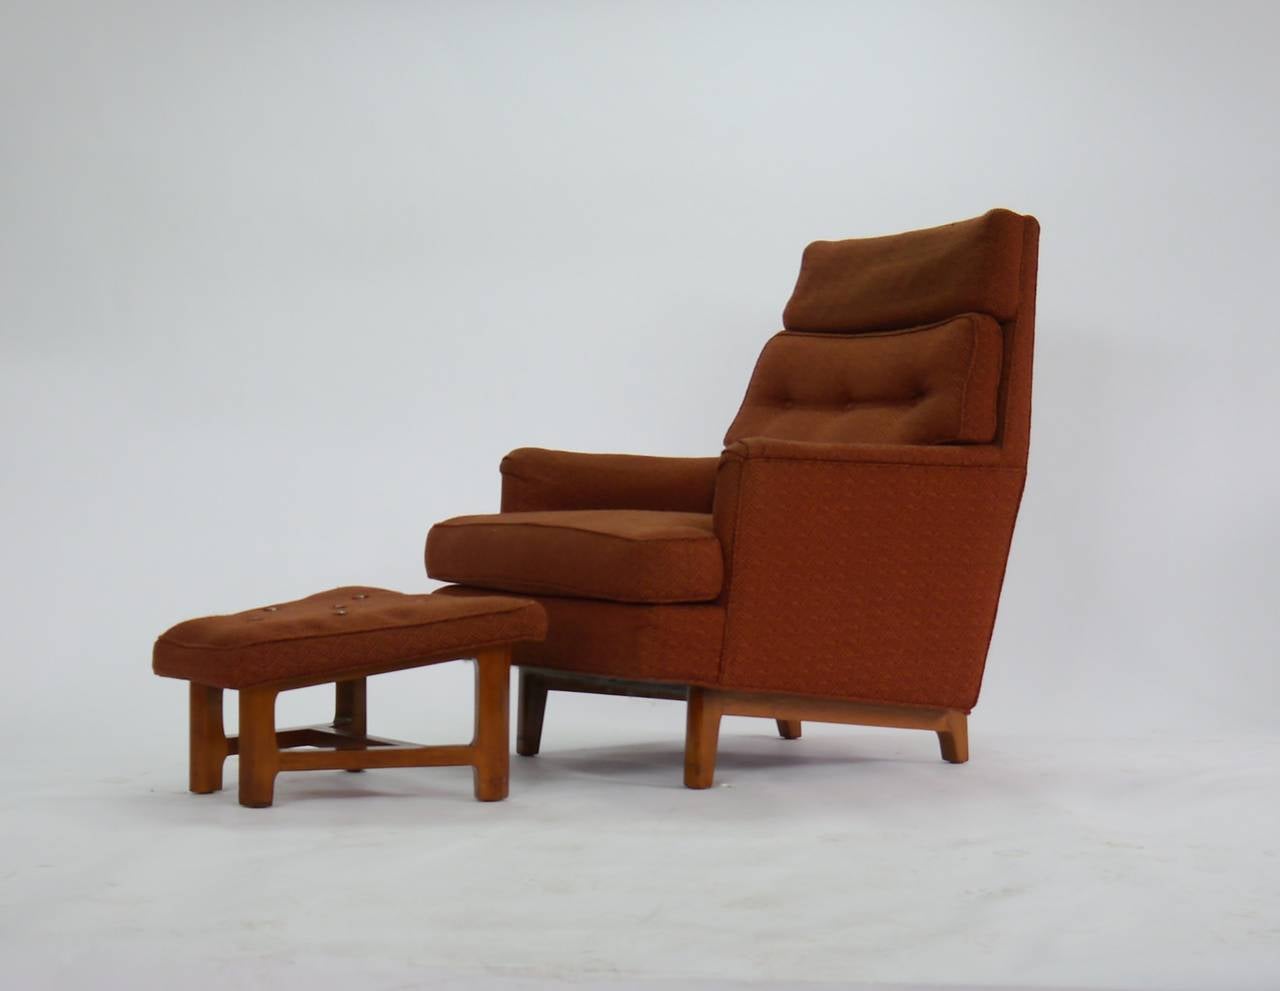 Bracket back lounge chair and ottoman by Edward Wormley for Dunbar. Two examples of each available. Wood components refinished to order.